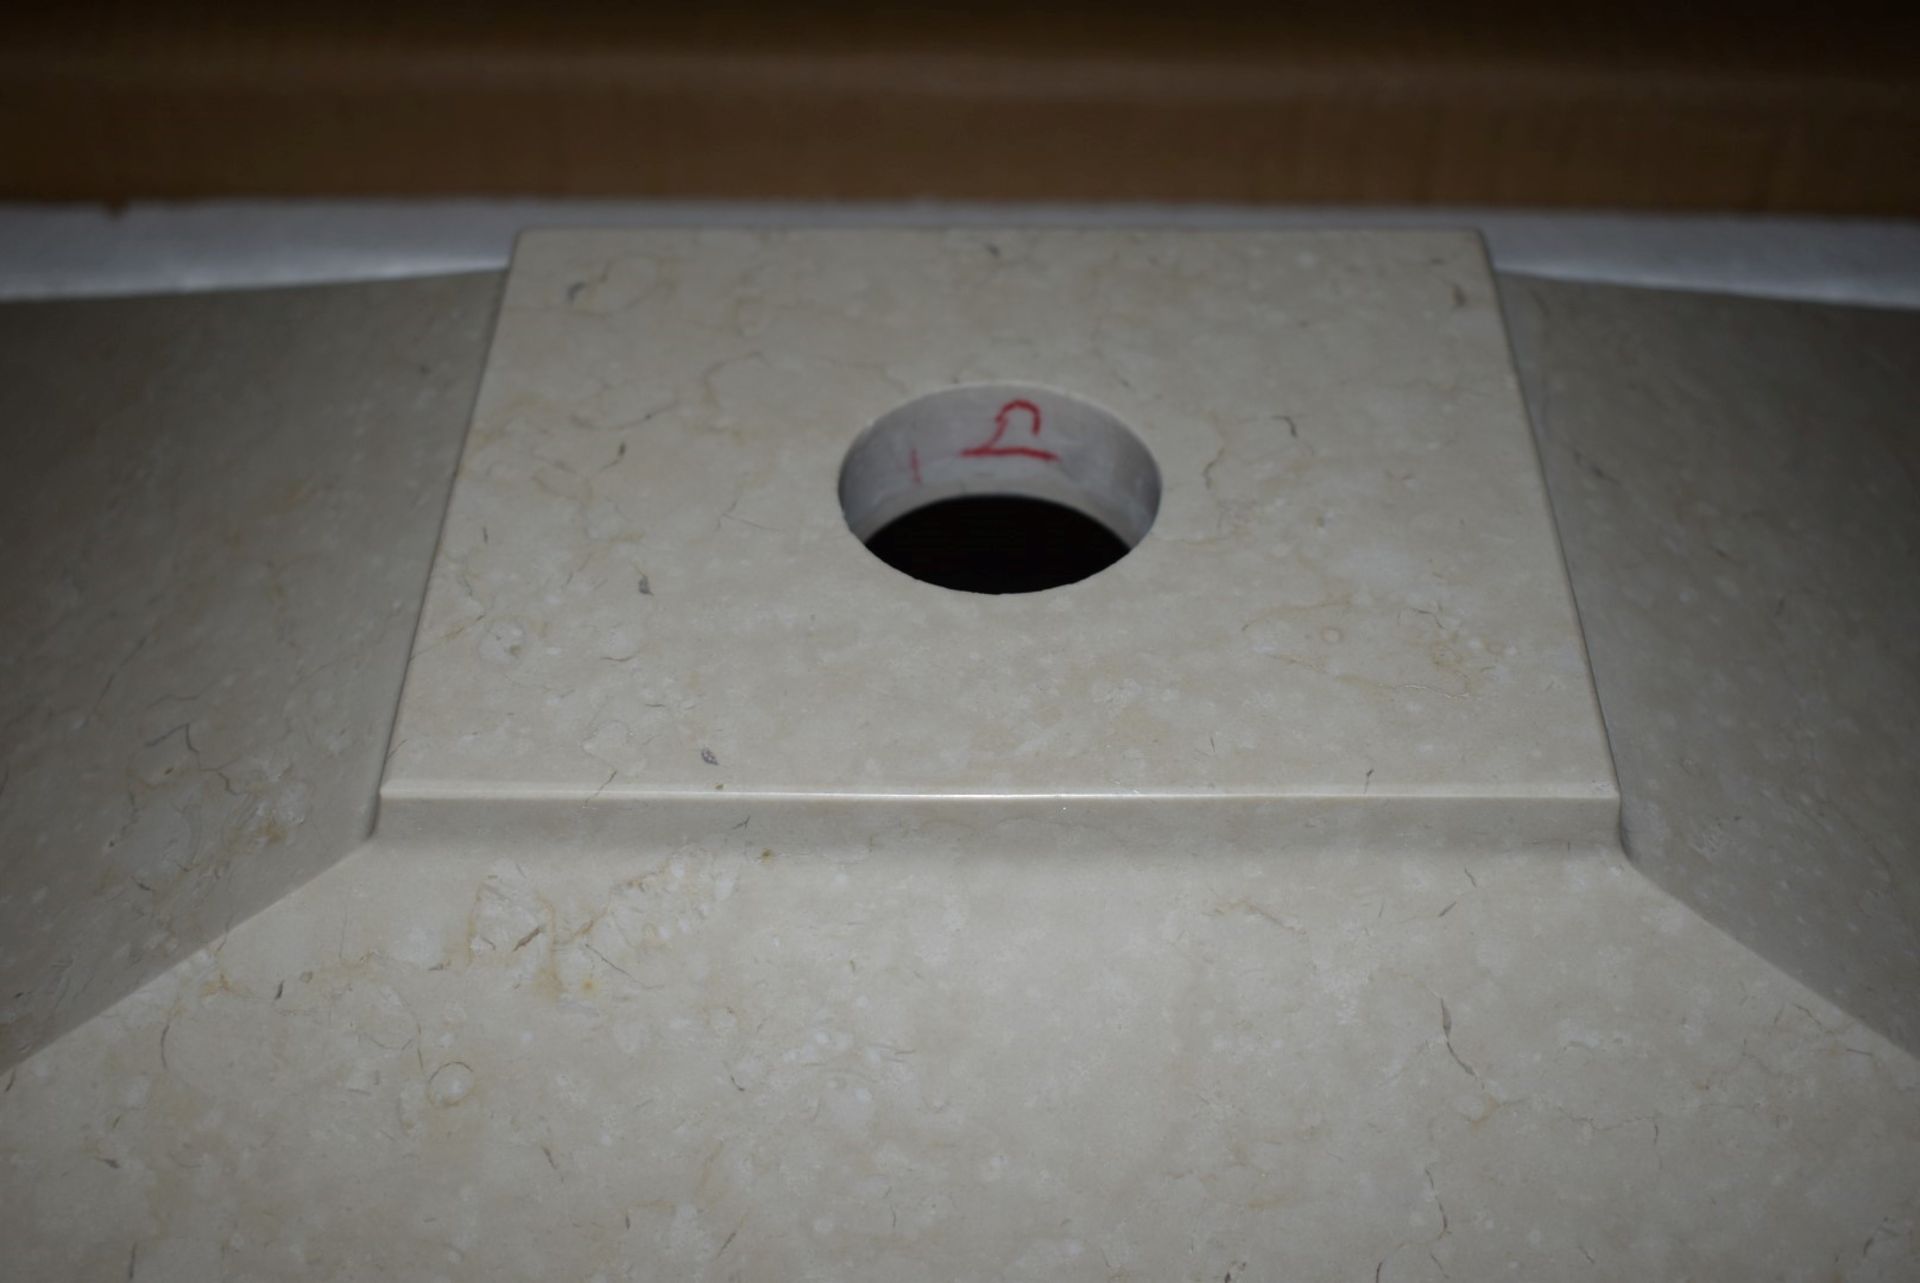 1 x Stonearth 'Karo' Solid Travertine Stone Countertop Sink Basin - New Boxed Stock - RRP £525 - Image 8 of 8